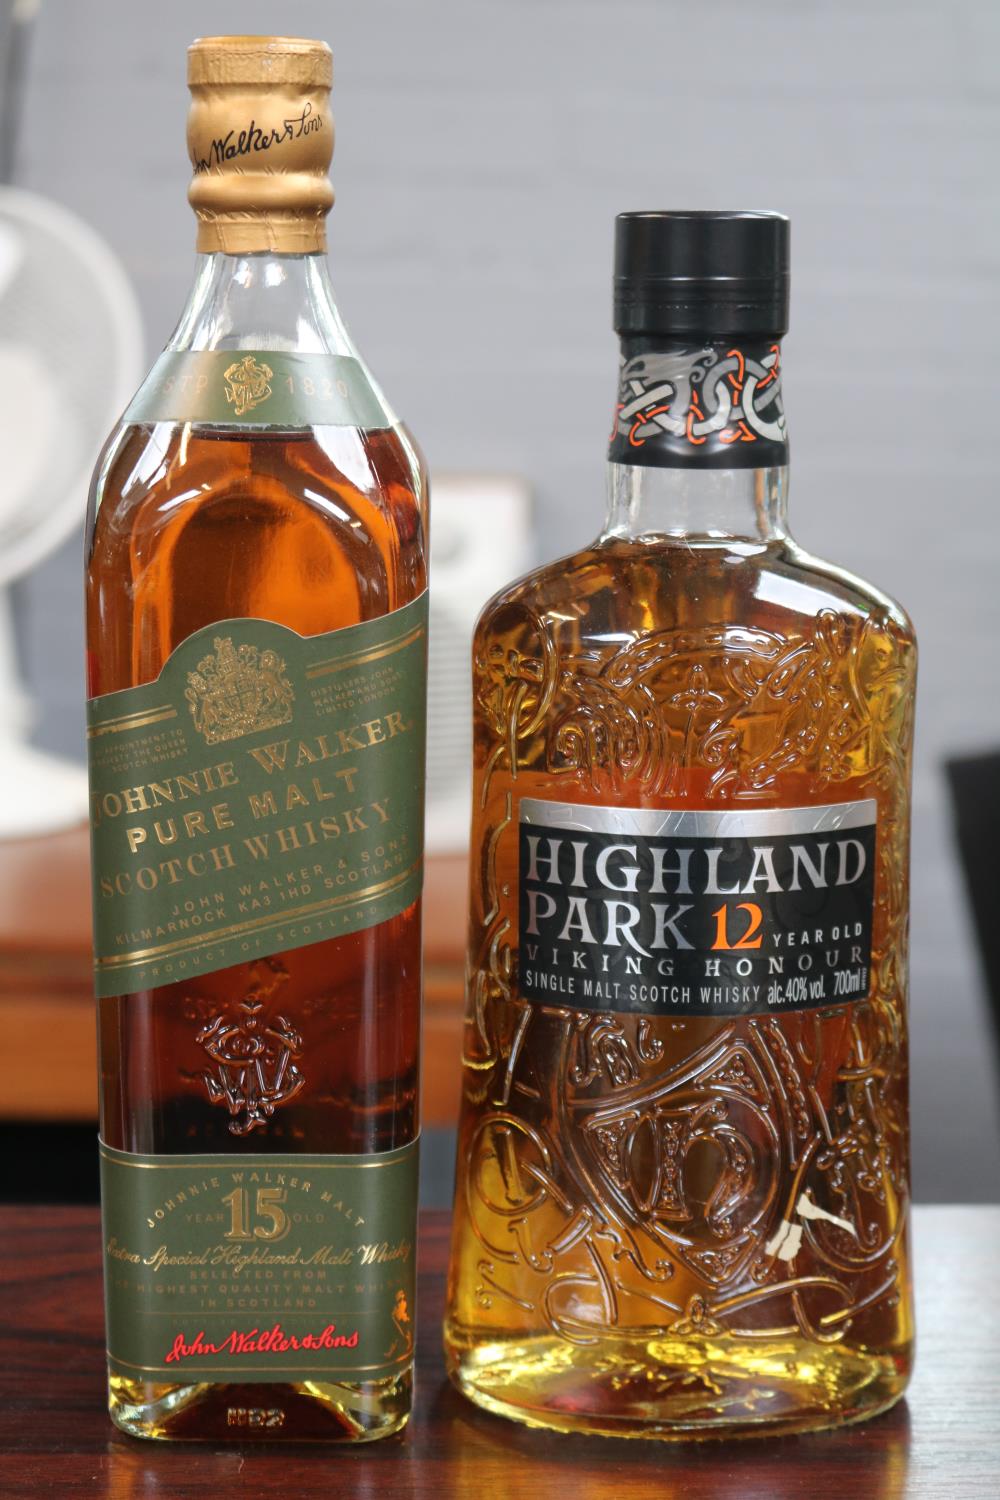 Bottle of Johnnie Walker Pure Malt Scotch Whisky 15 year green label and a bottle of Highland Park